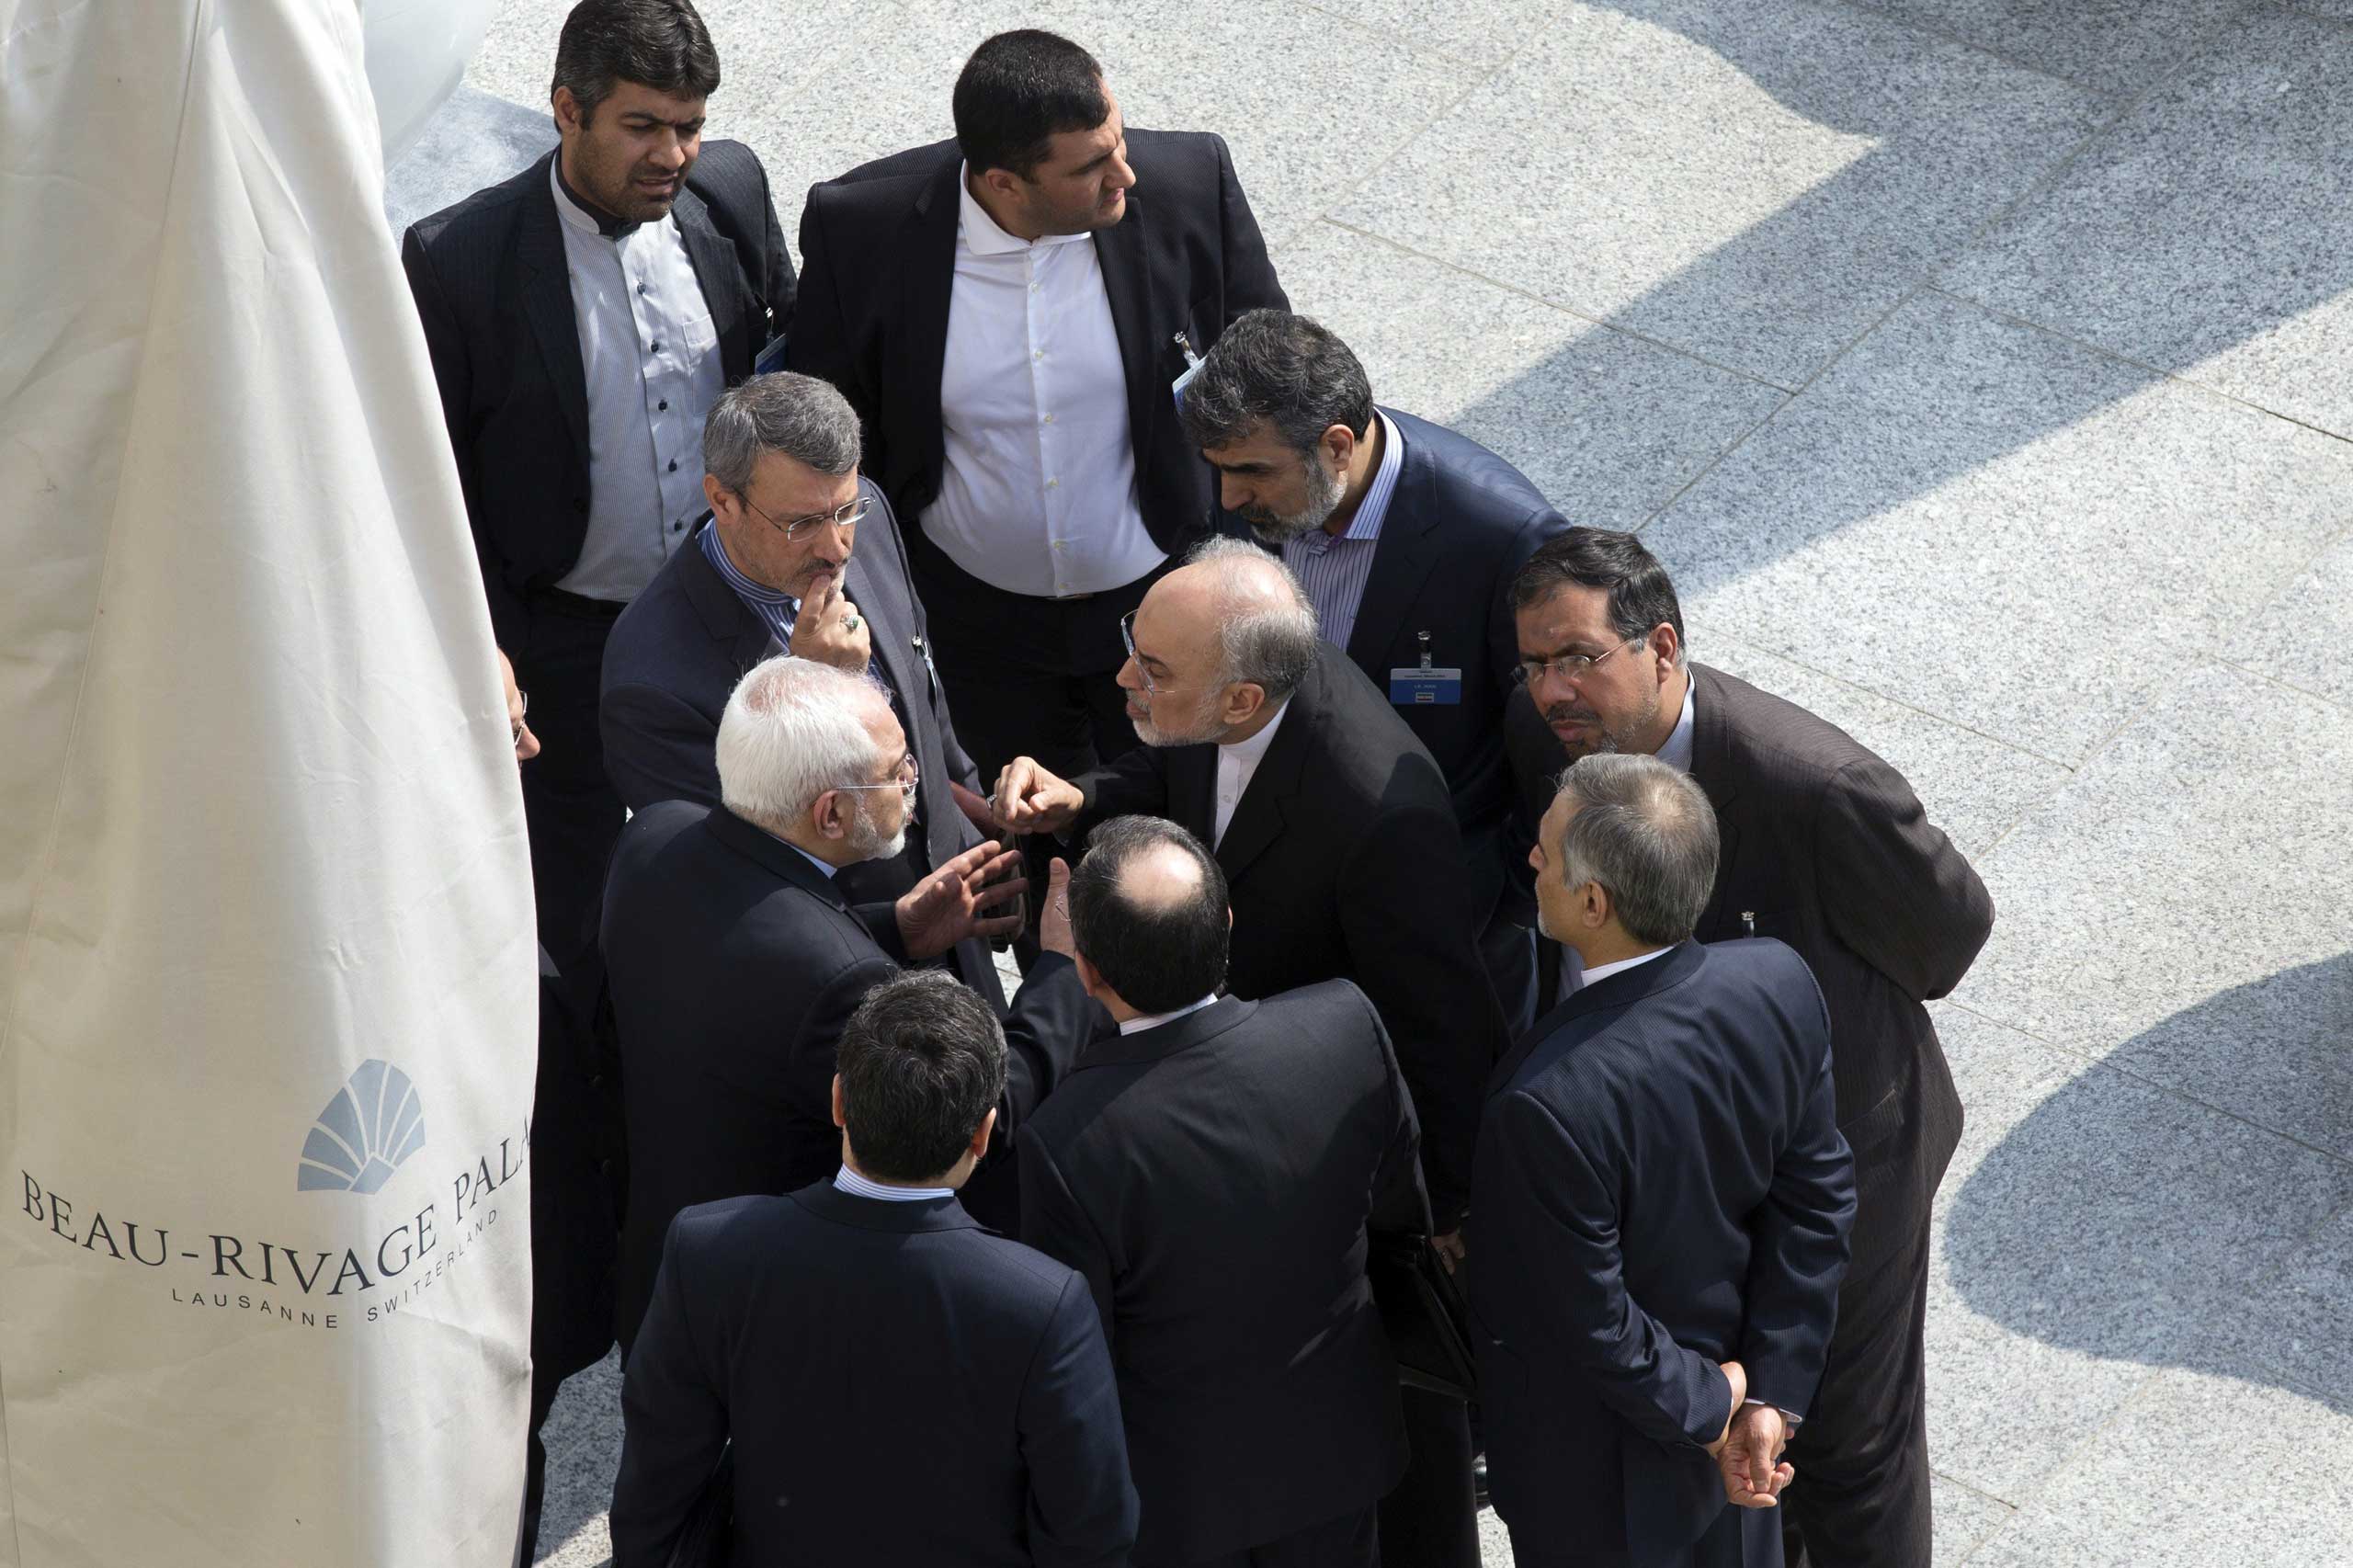 Iranian Foreign Minister Mohammad Javad Zarif, and the head of the Atomic Energy Organization of Iran, Ali Akbar Salehi, talk with aides after a morning negotiation session with U.S. Secretary of State John Kerry over Iran's nuclear program in Lausanne, Switzerland, on March 19, 2015 (Brian Snyder—AFP/Getty Images)